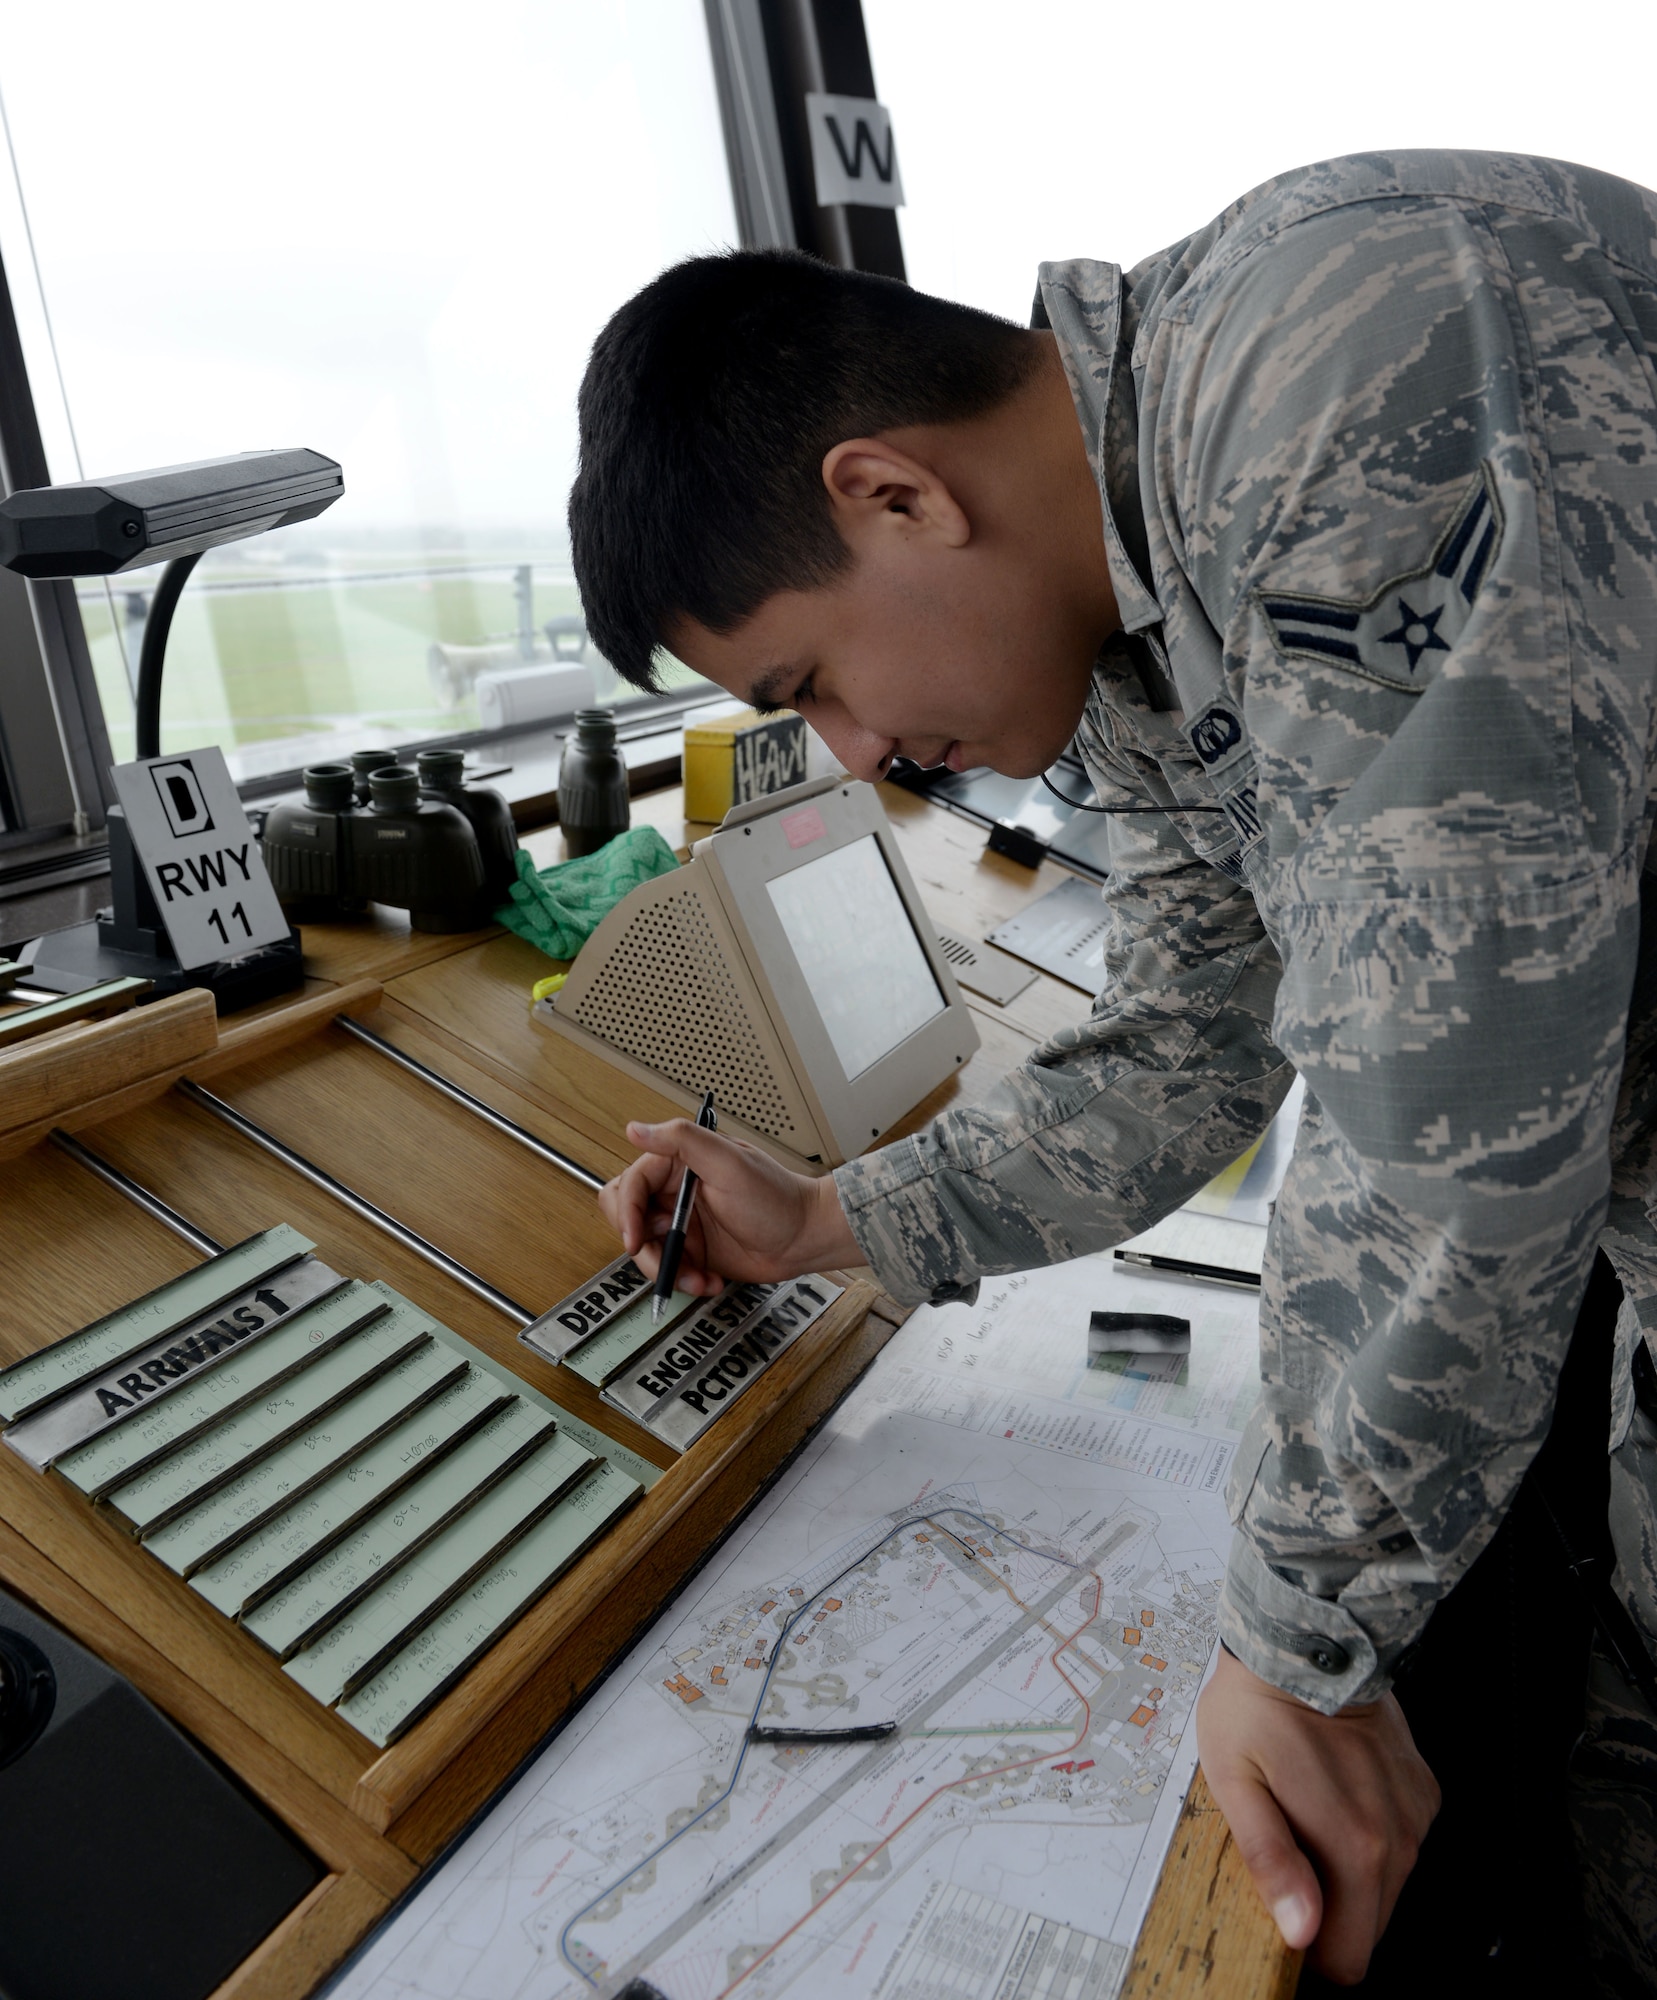 U.S. Air Force Airman 1st Class Luis Iniguez Ramirez, 100th Operations Support Squadron air traffic controller, checks the departure and arrival manifesto inside the air traffic control tower at RAF Mildenhall, England, April 9, 2018. The ever-watching eye of the air traffic controllers from the 100th OSS keeps our skies and aircraft safe. (U.S. Air Force photo by Airman 1st Class Alexandria Lee)